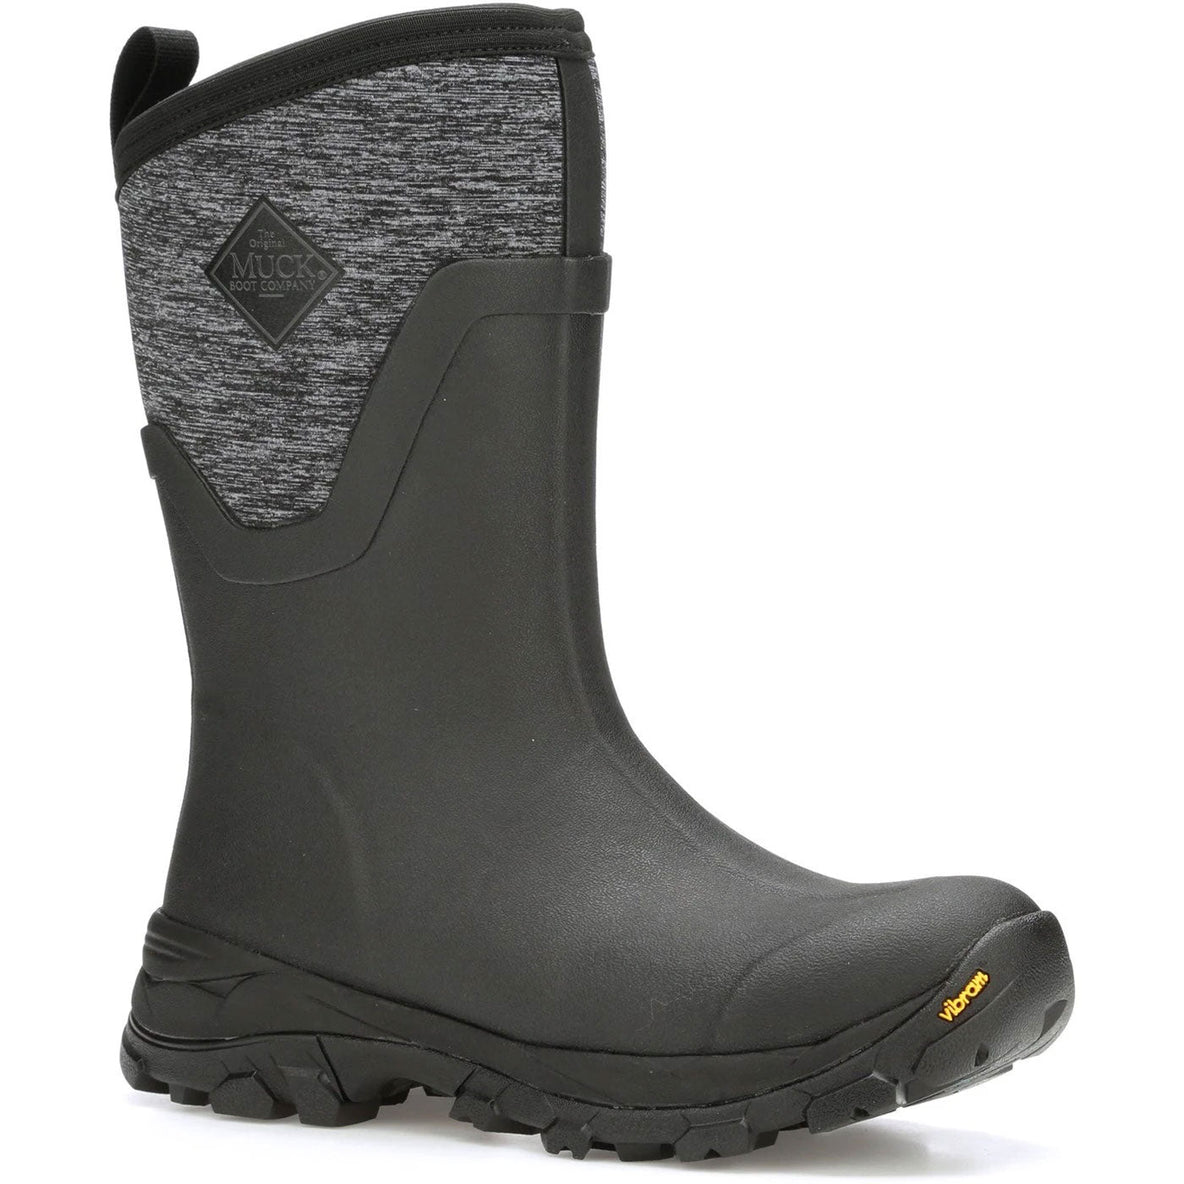 Black Heather Muck Boots Arctic Ice Mid Boots